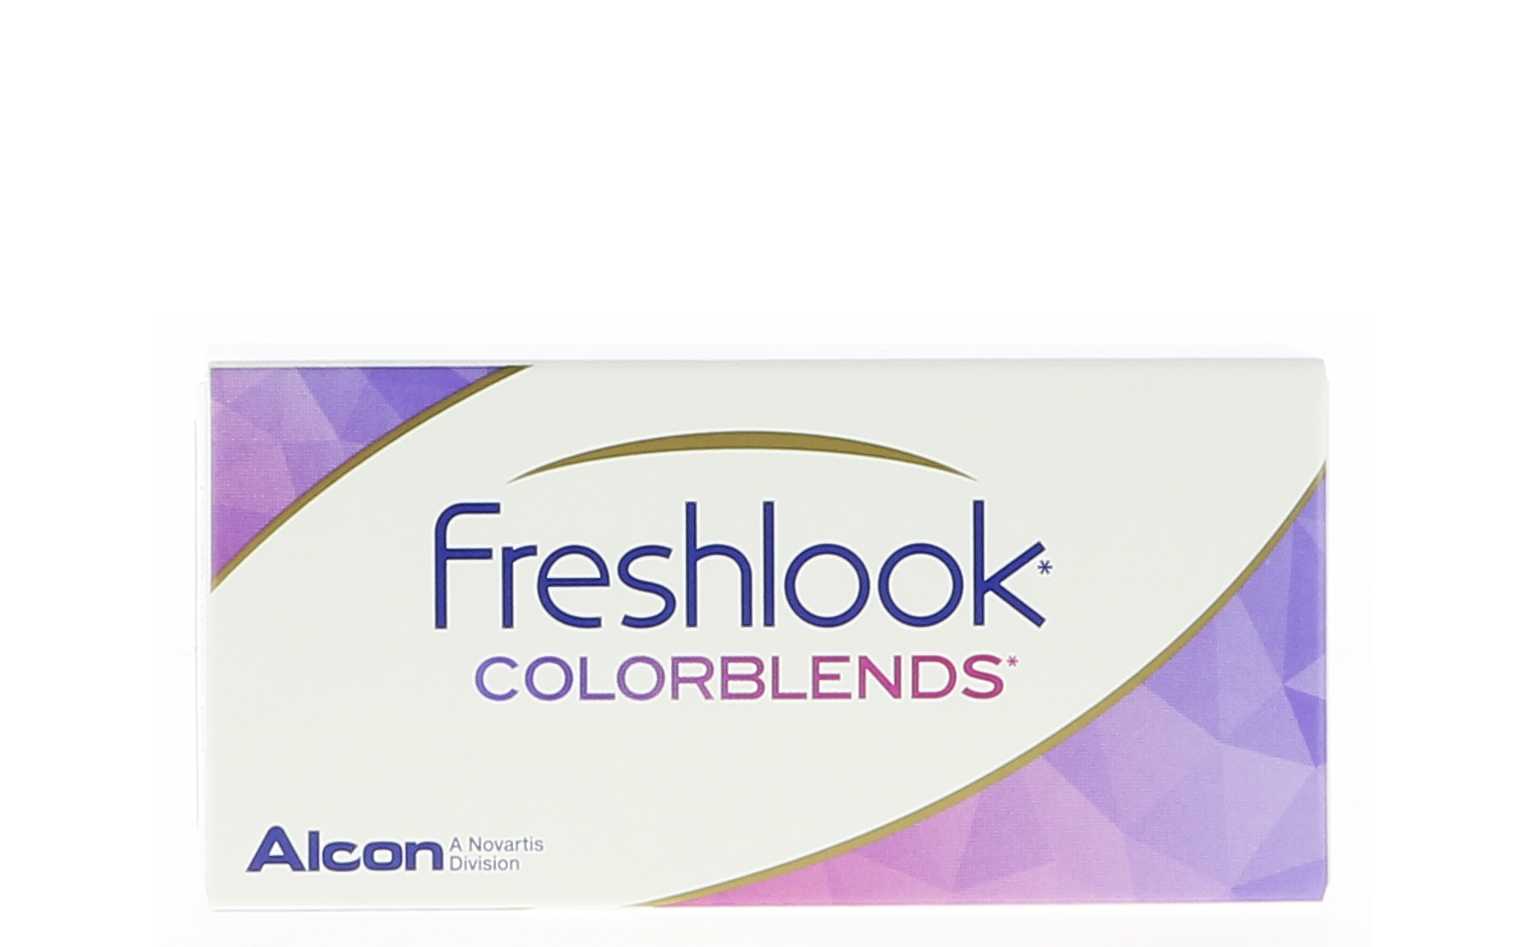  FRESHLOOK COLORBLENDS ALCON